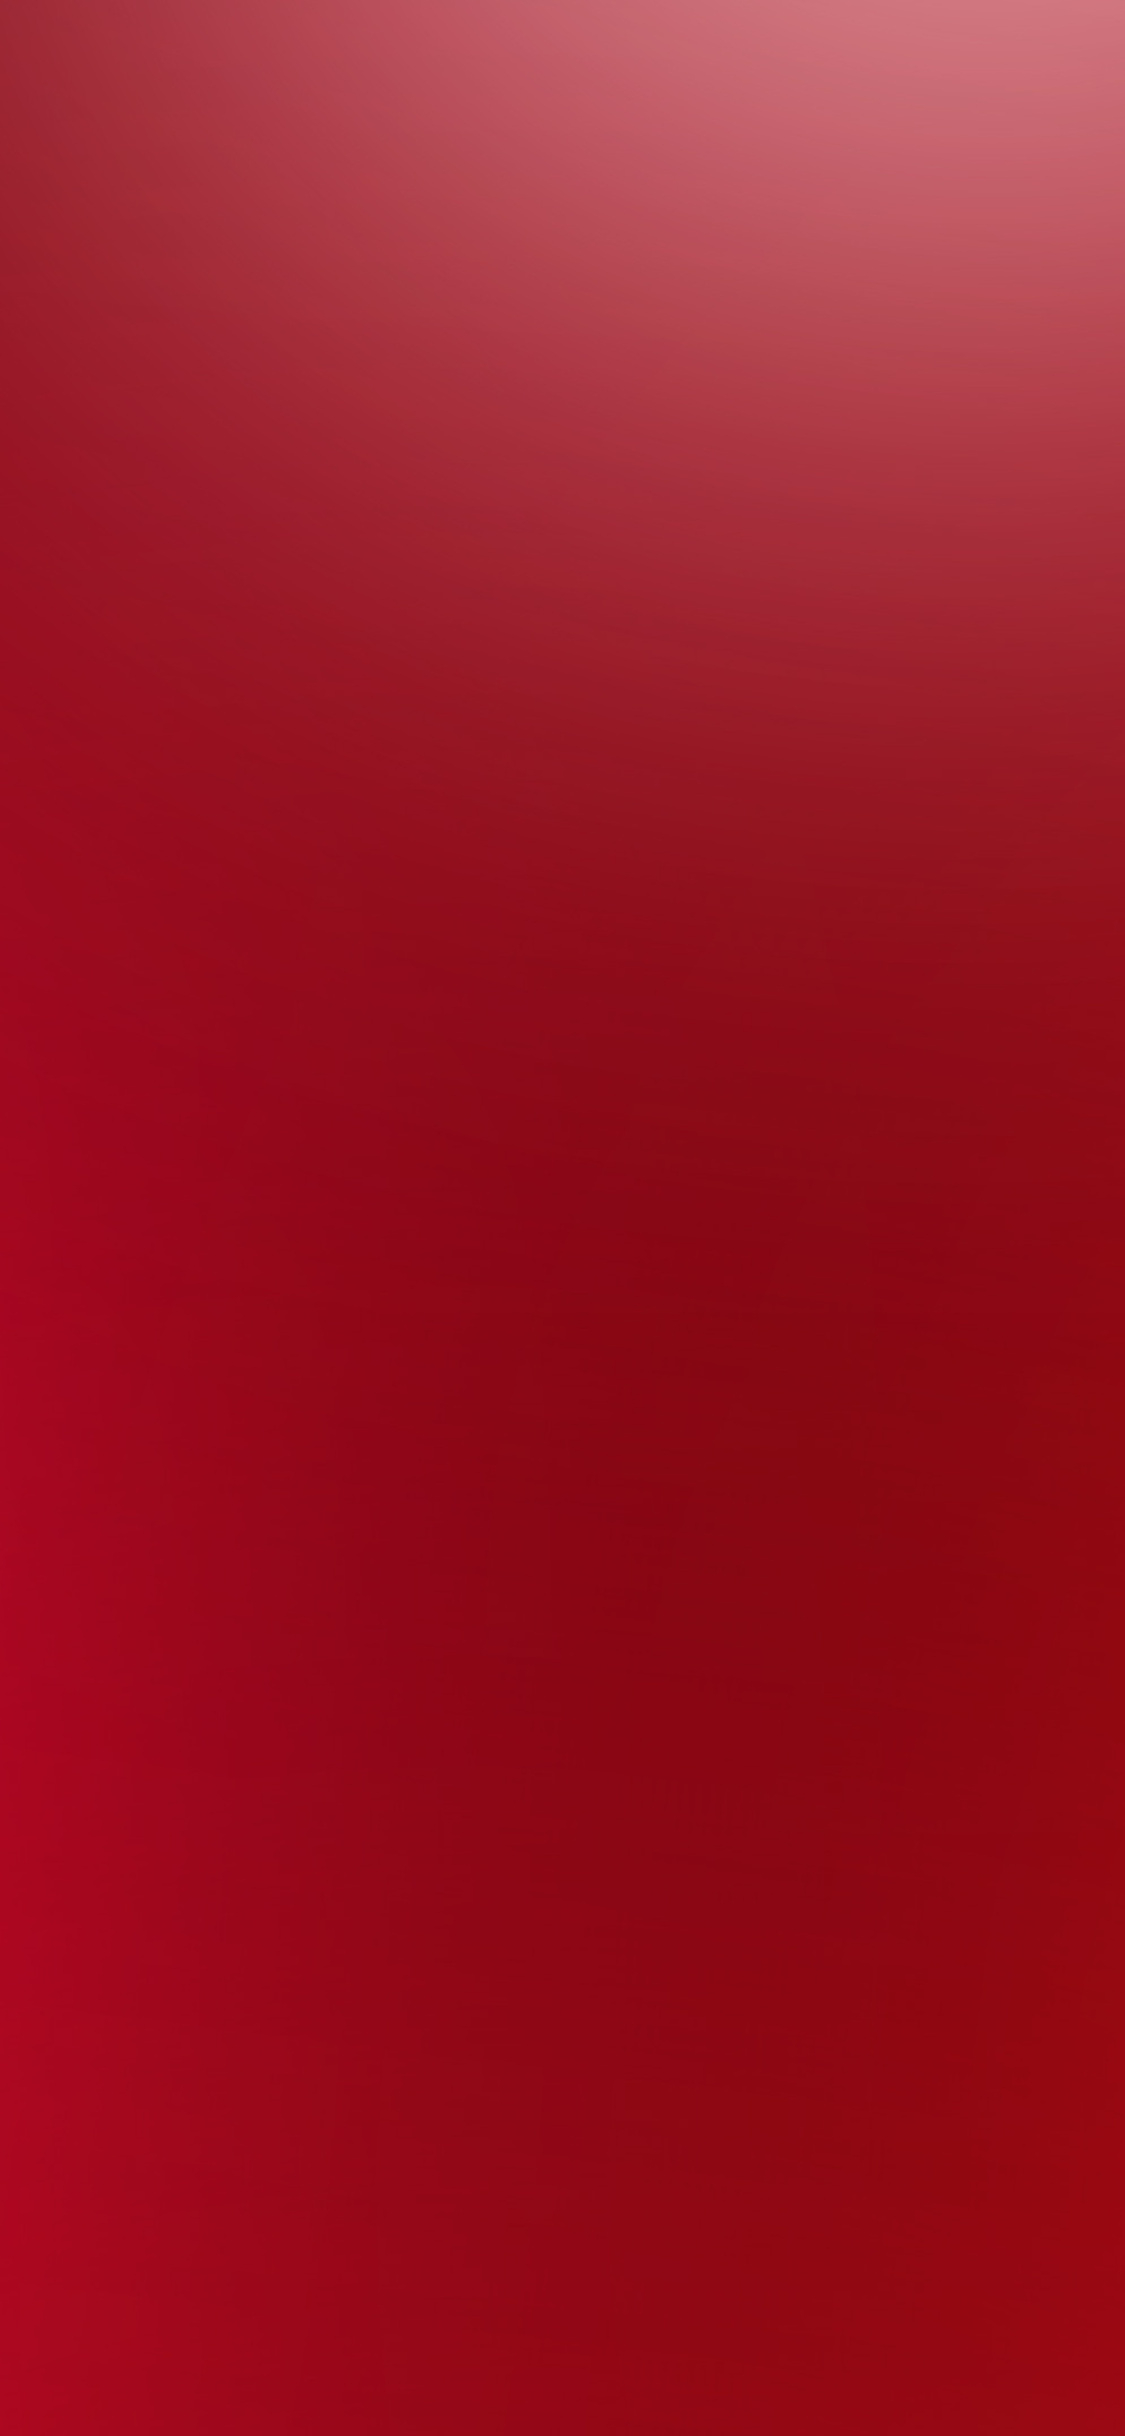 1125x2436 Red Gradient Minimal 4k Iphone XS,Iphone 10,Iphone X HD 4k Wallpapers, Images, Backgrounds, Photos and Pictures